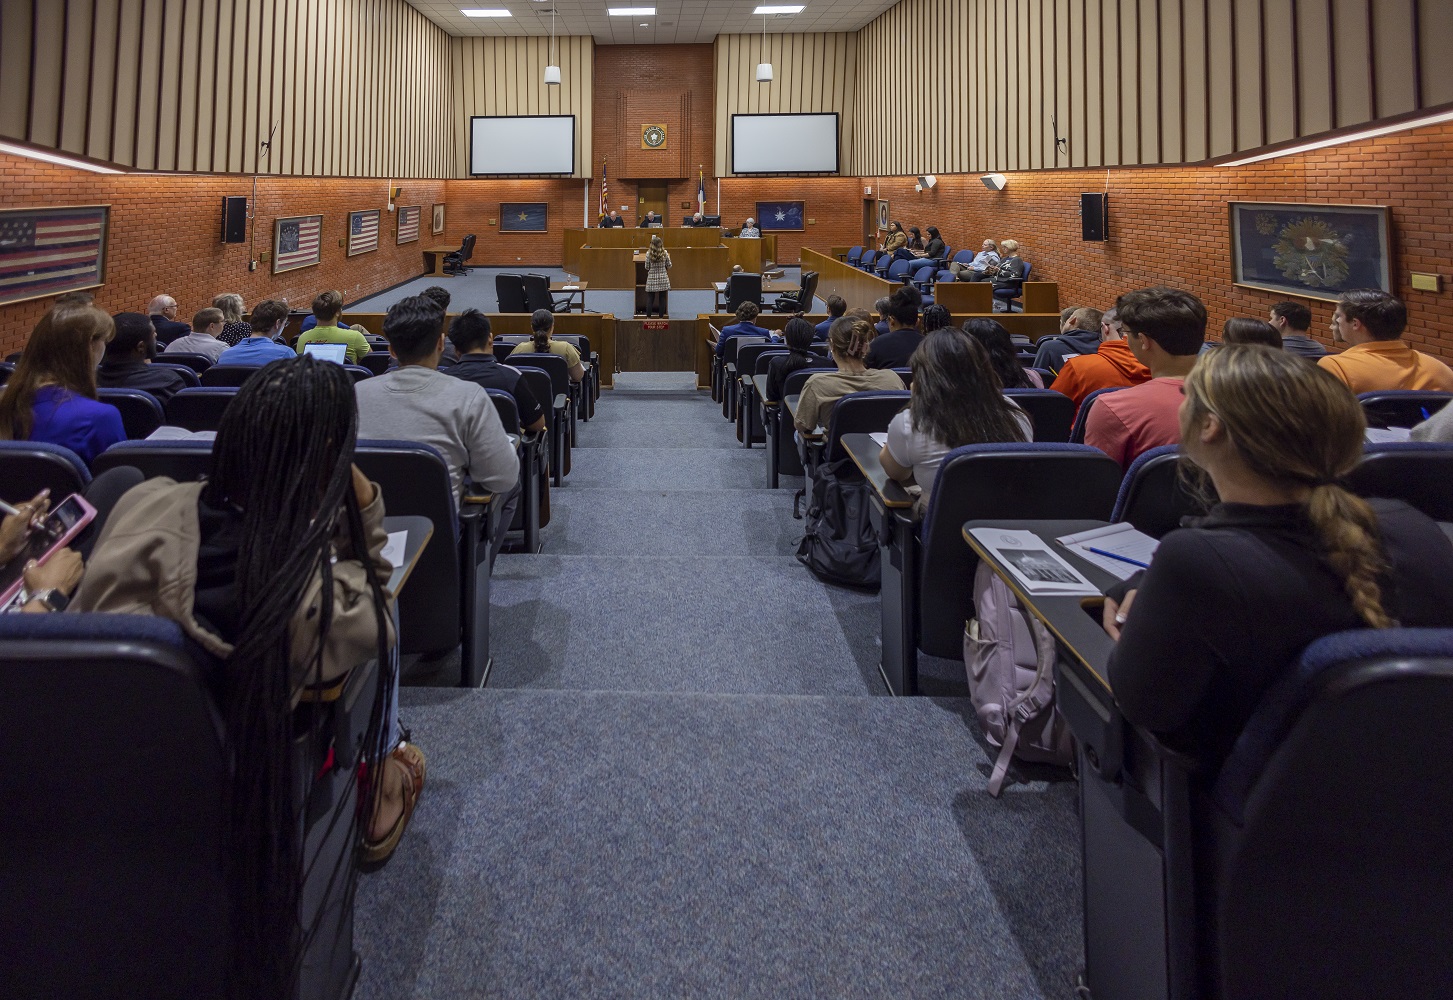 This spring semester will mark the 7th visit of the 10th Court of Appeals at SHSU.